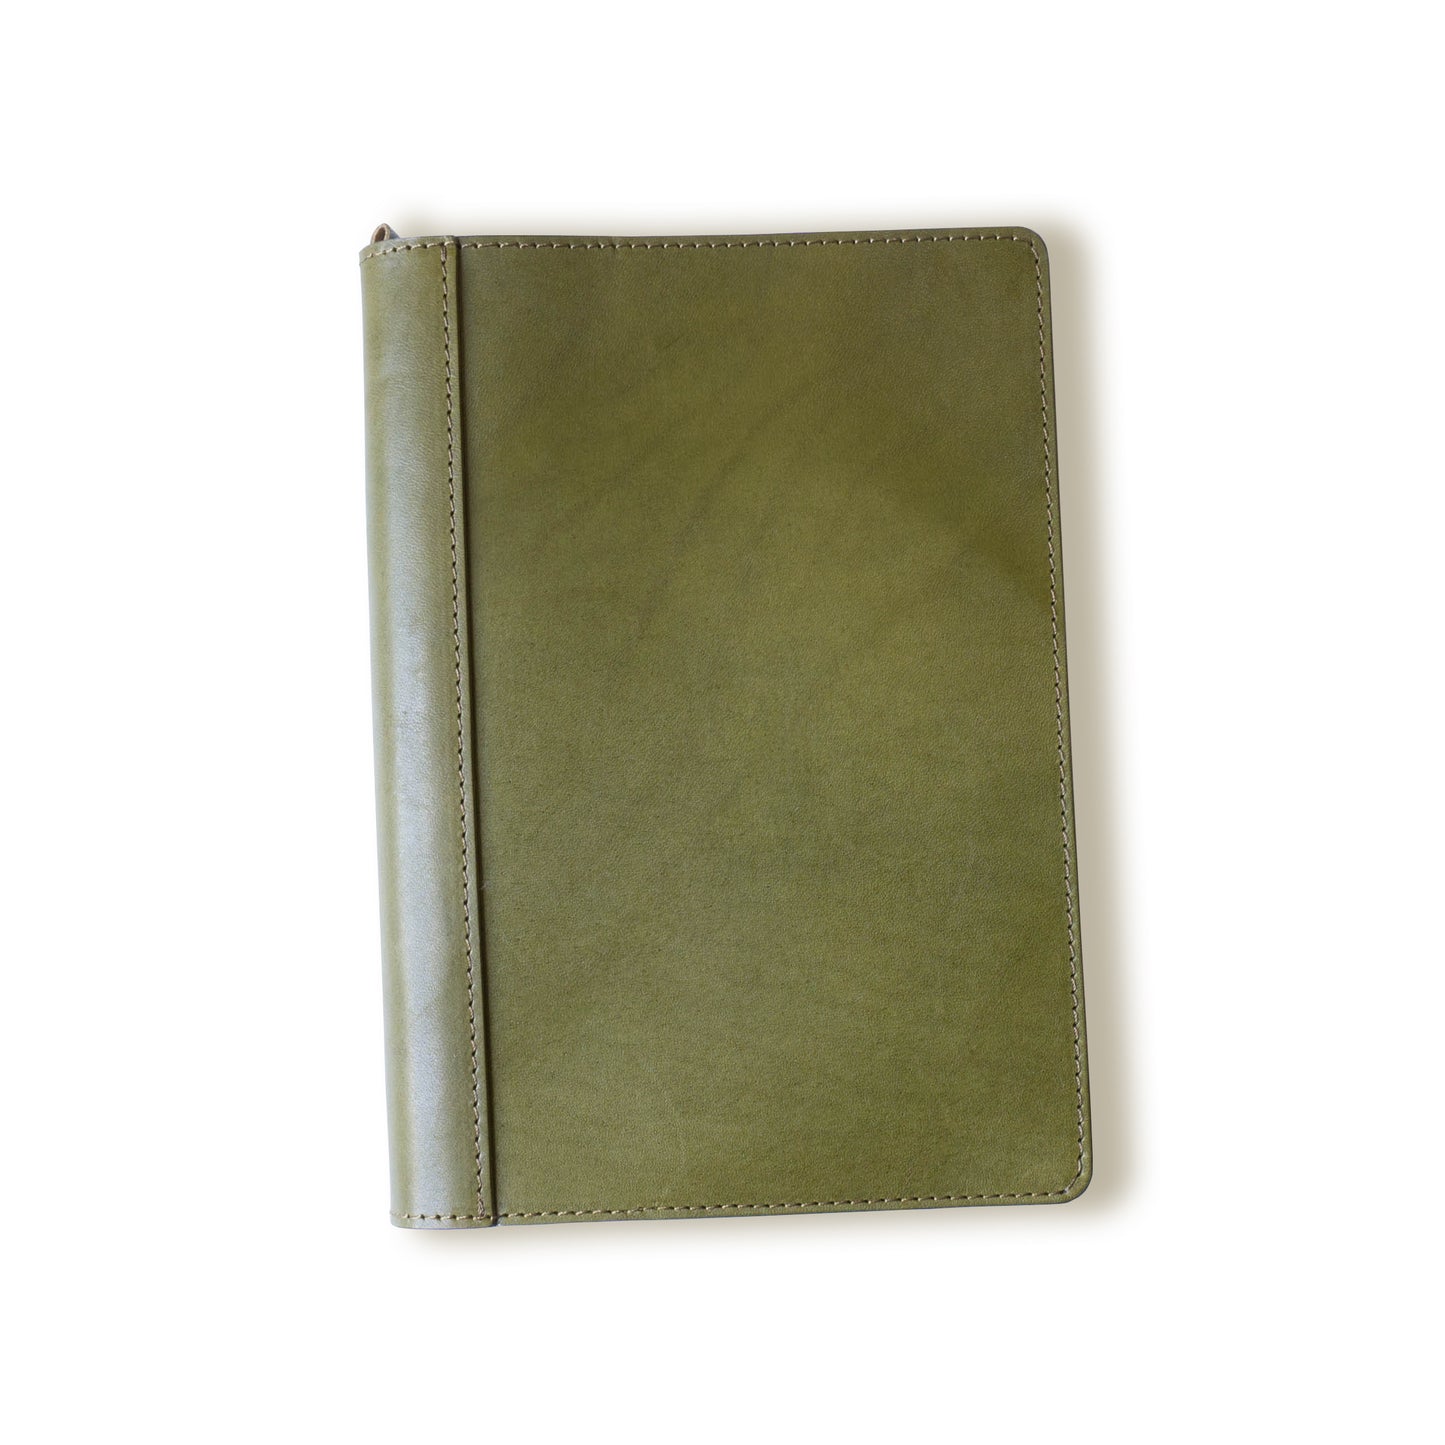 [Japanese Craftsman Made / Vintage] Notebook cover B6 size  (Leather tanned with vegetable tannins)